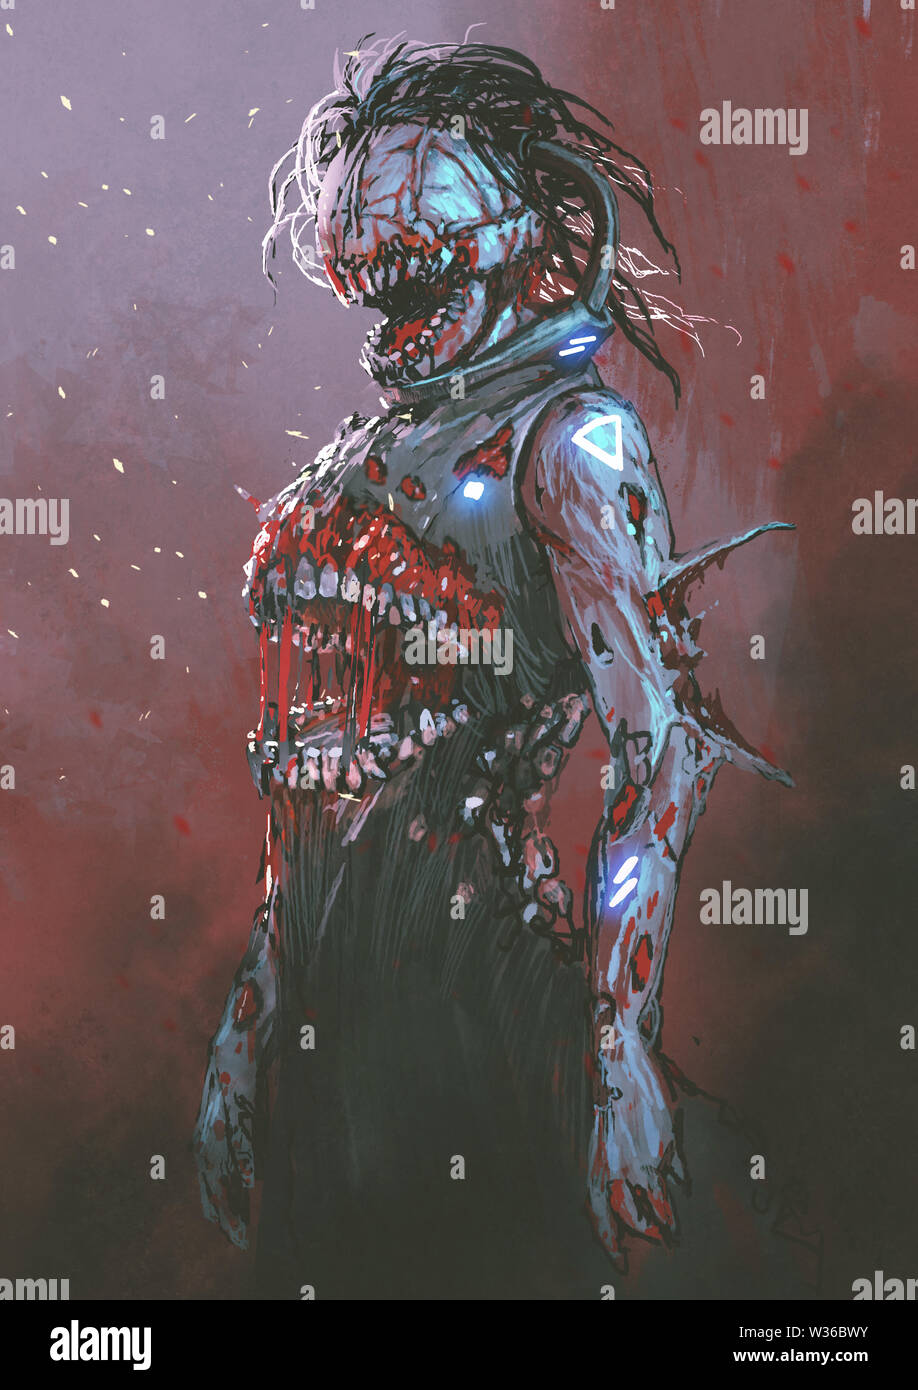 creepy zombie with bloody mouth in the middle of body, digital art style, illustration painting Stock Photo